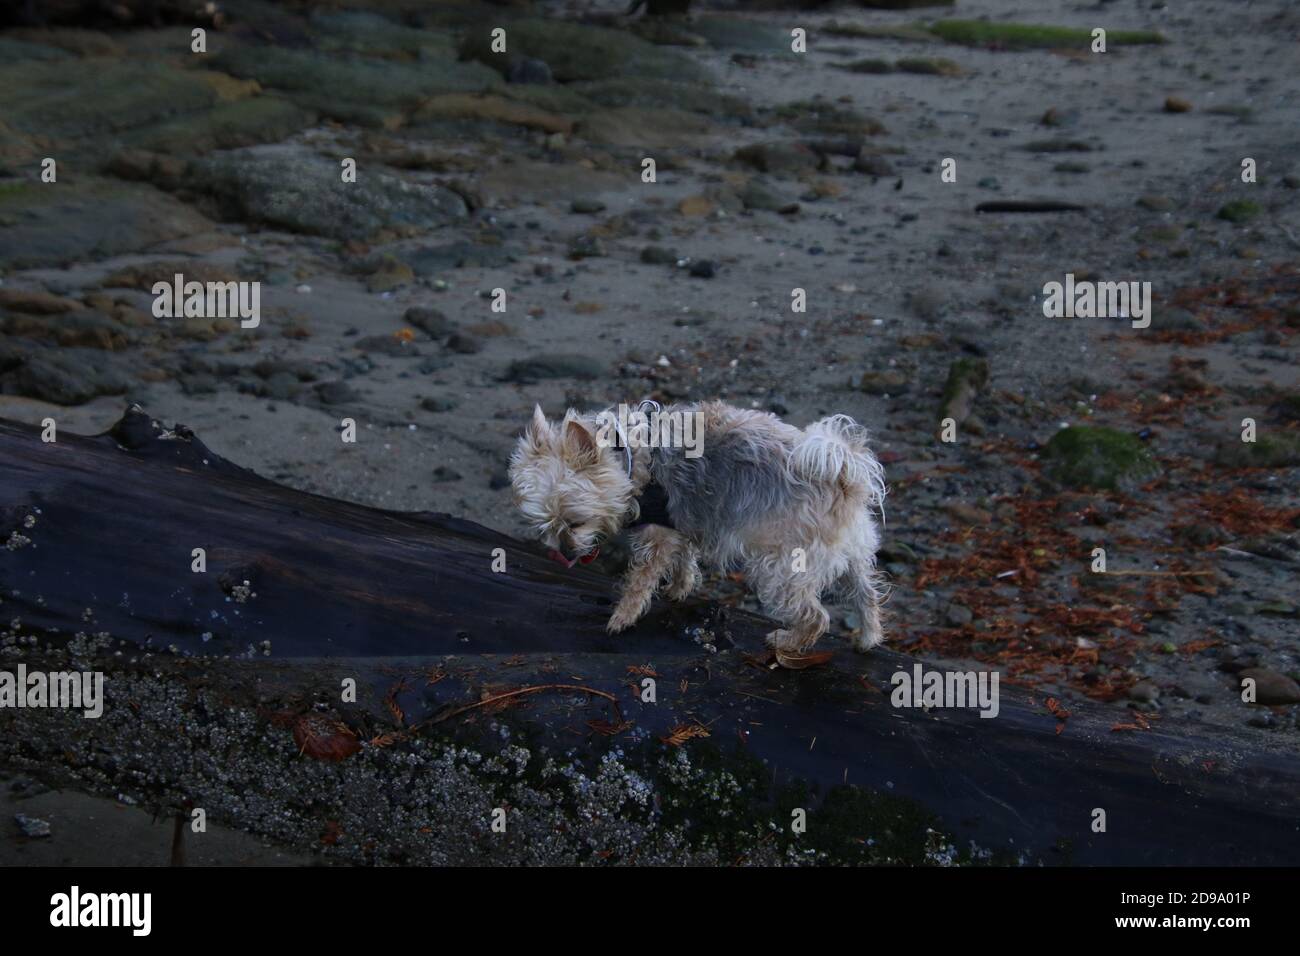 A silky terrier X walking on a wet log laying in the sand Stock Photo